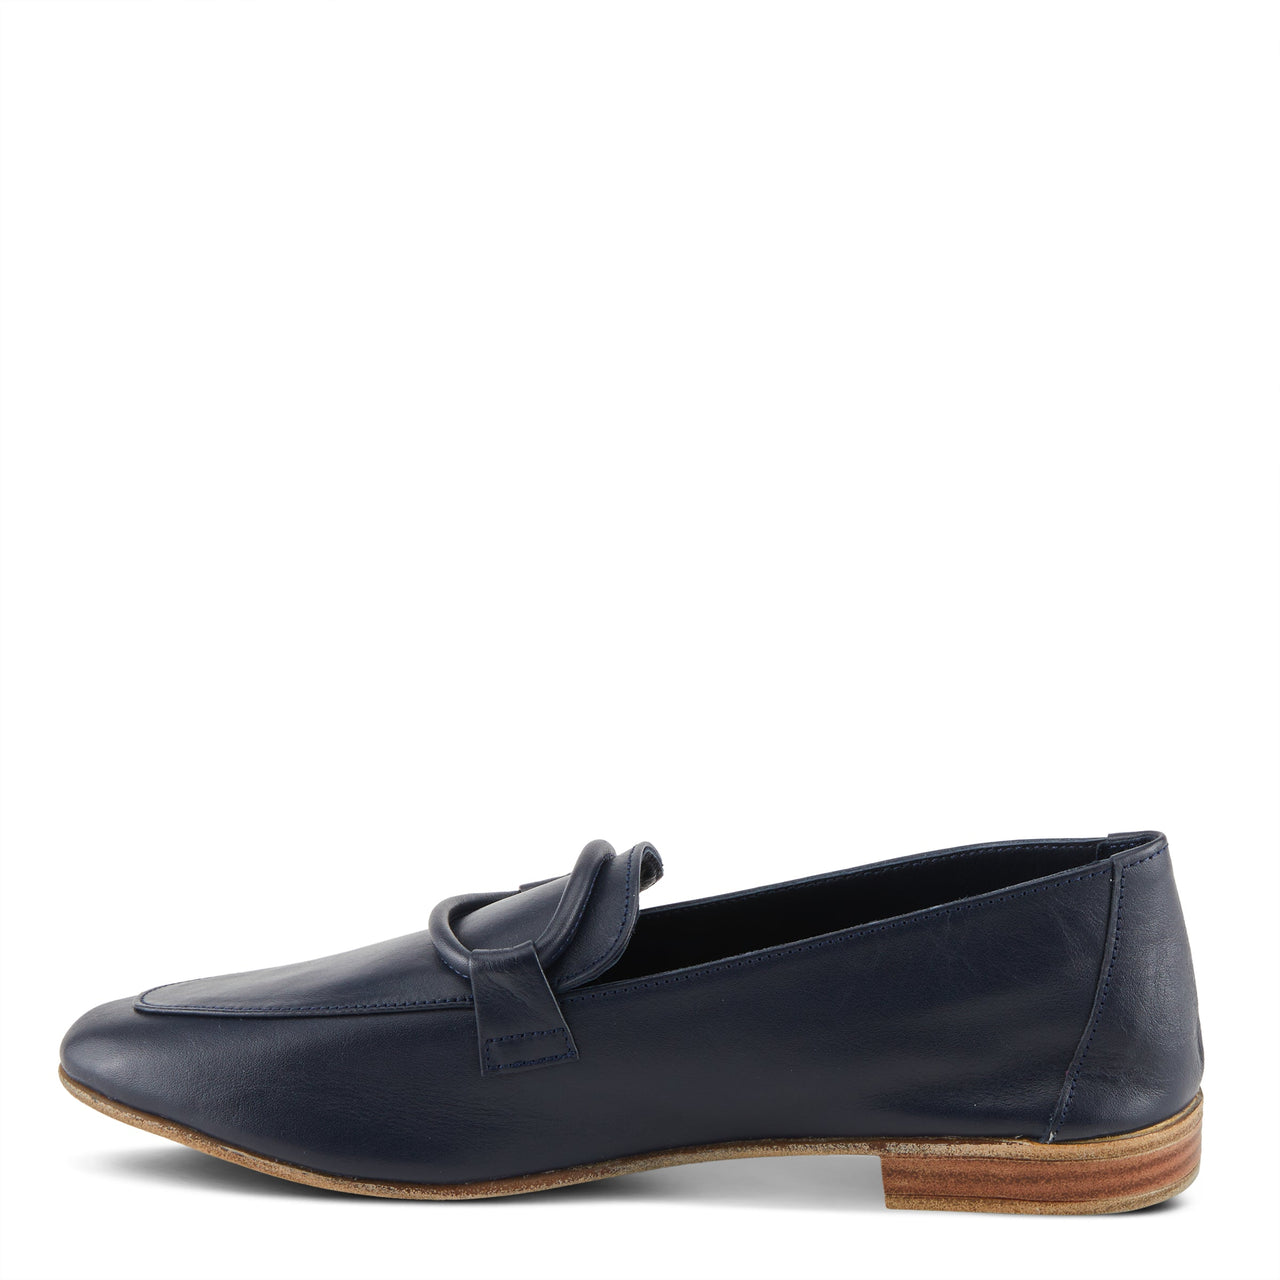 Stylish and comfortable Spring Step Carrington shoes in black leather